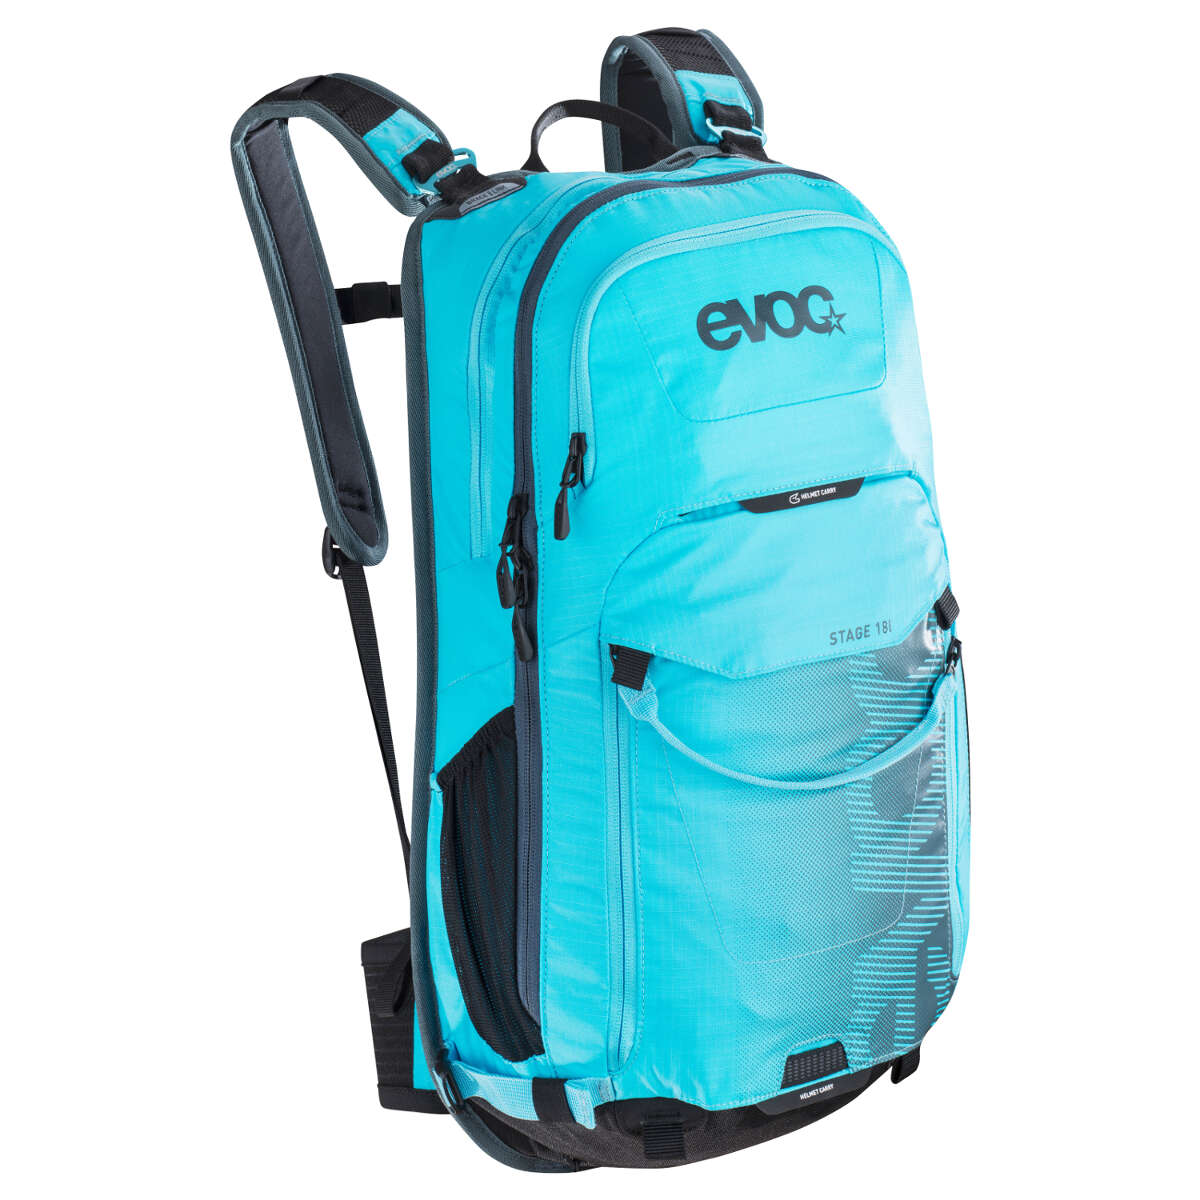 Evoc Backpack with Hydration System Compartment Stage Neon-Blue, 18 Liter